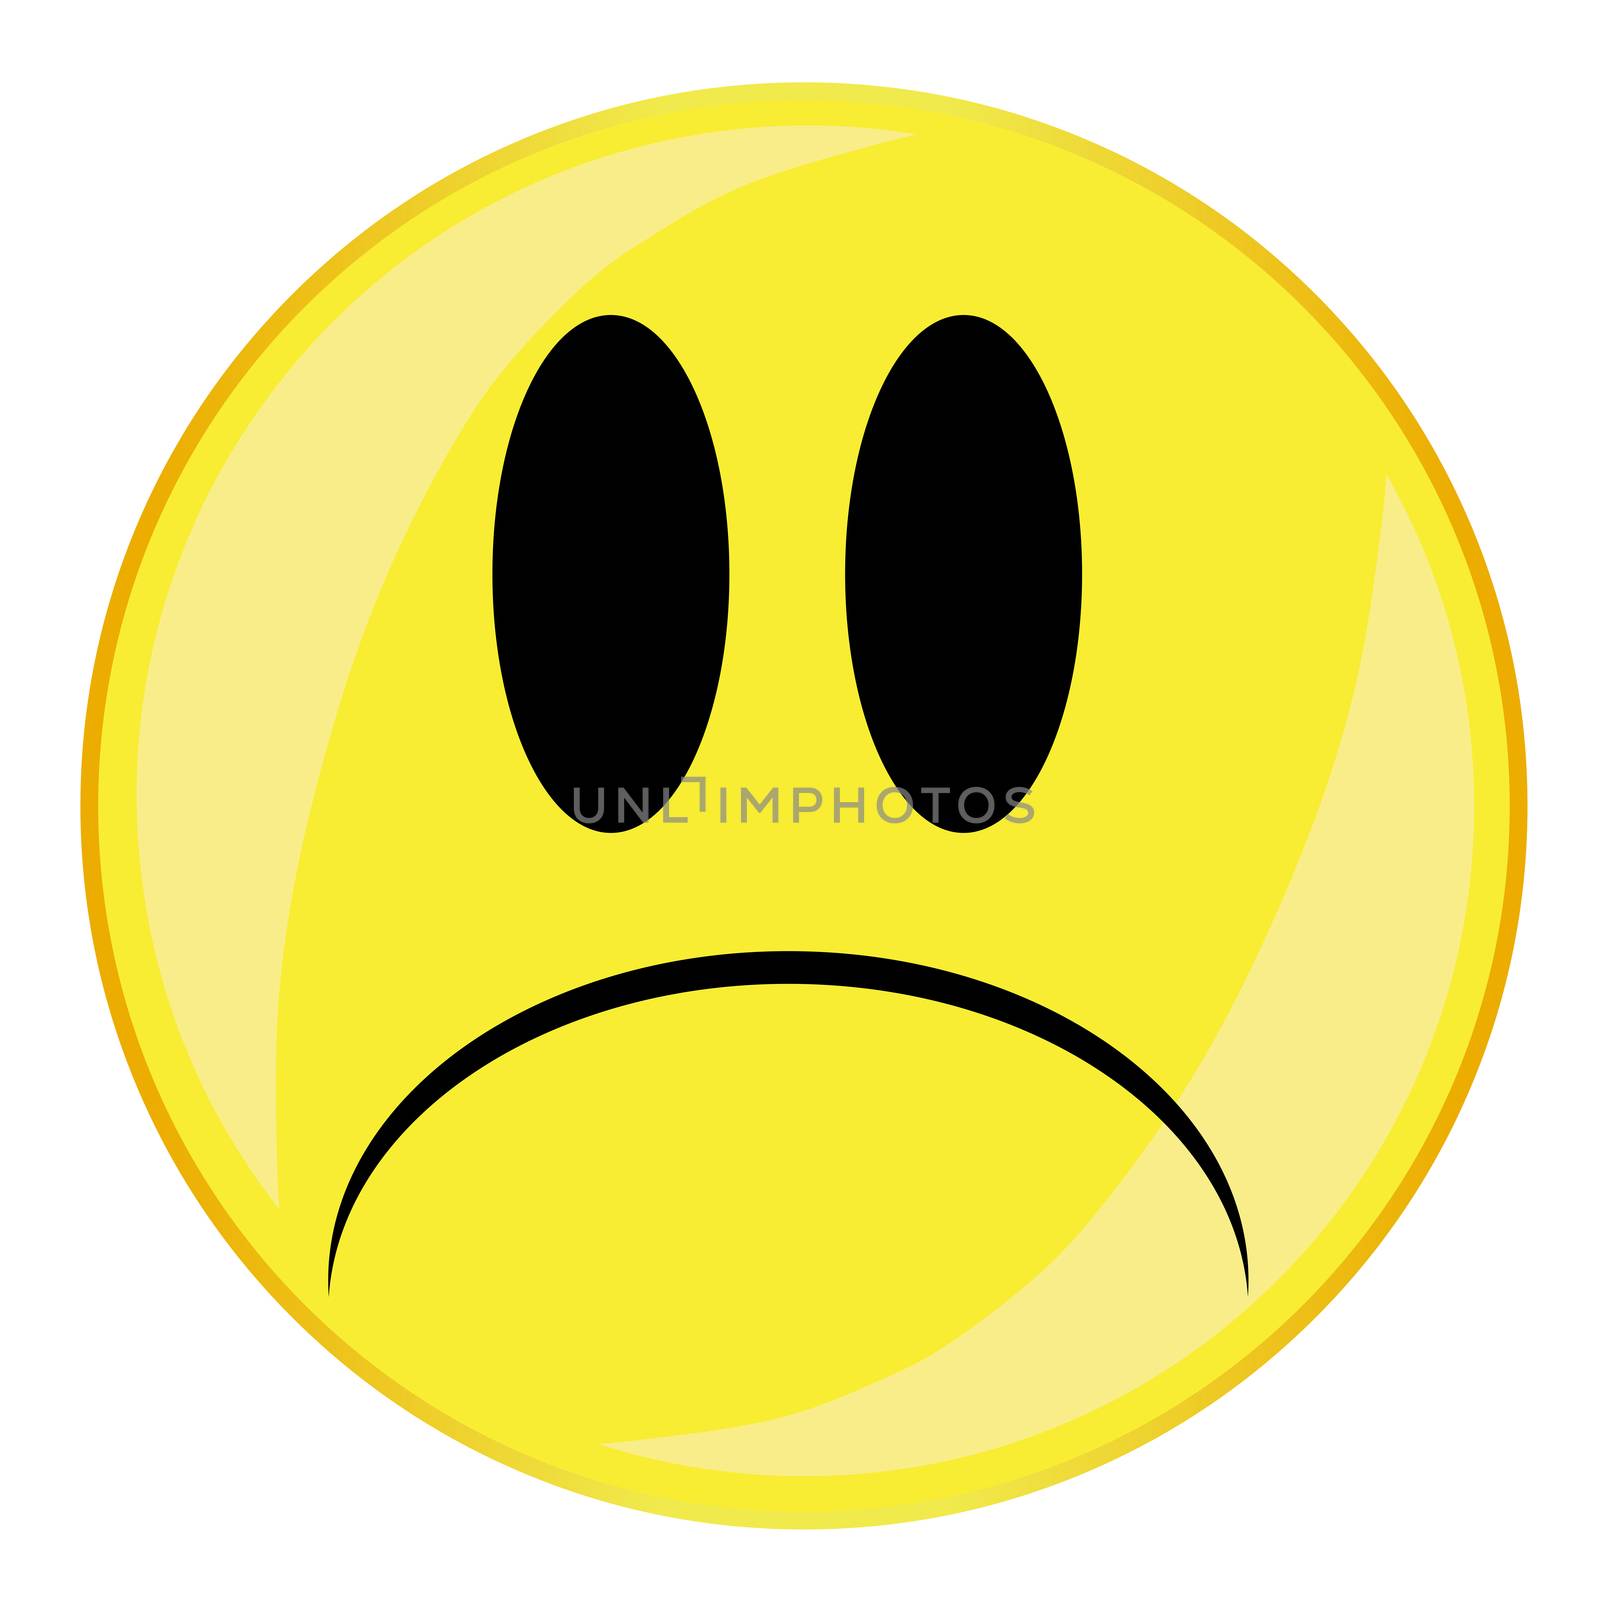 A unhappy smile face button isolated on a white background